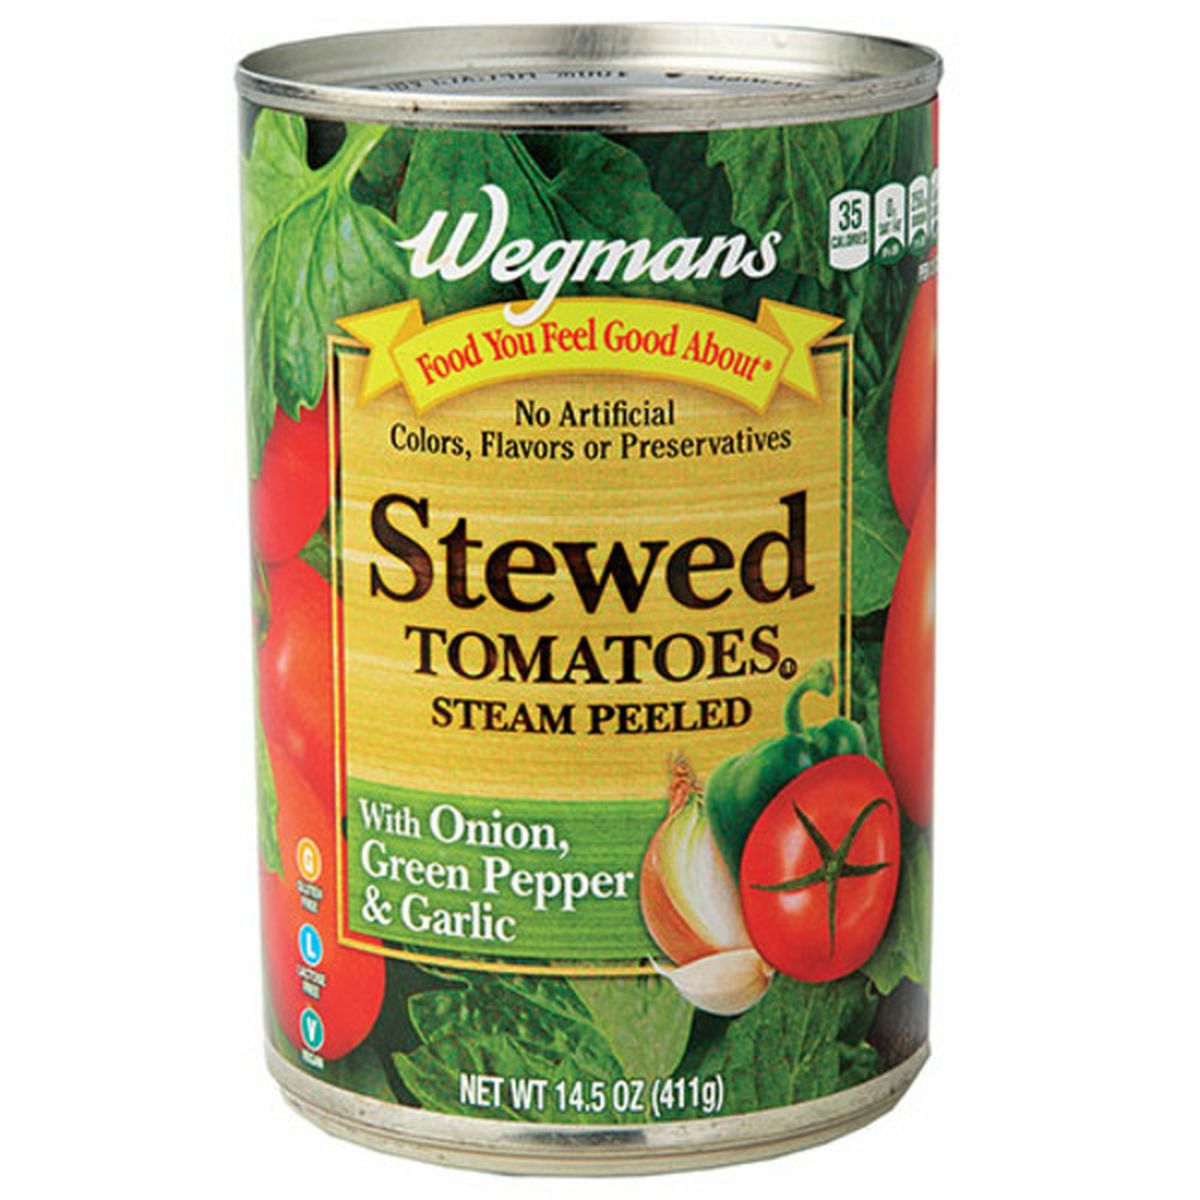 Calories in Wegmans Stewed Tomatoes with Onion, Green Pepper, & Garlic